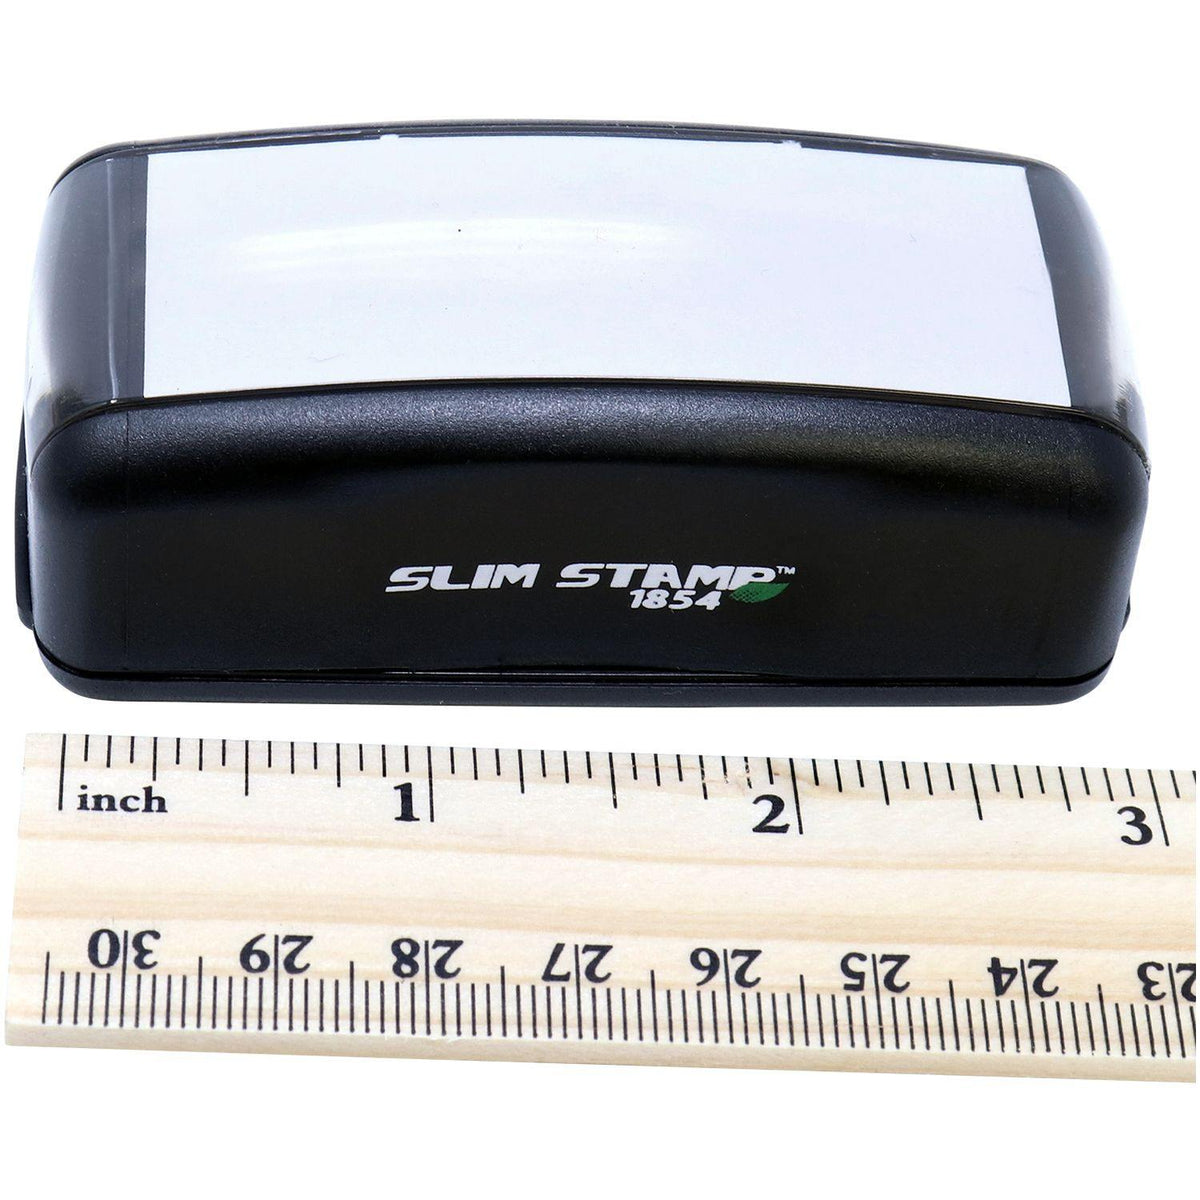 Measurement Large Pre-Inked Invoice Stamp with Ruler